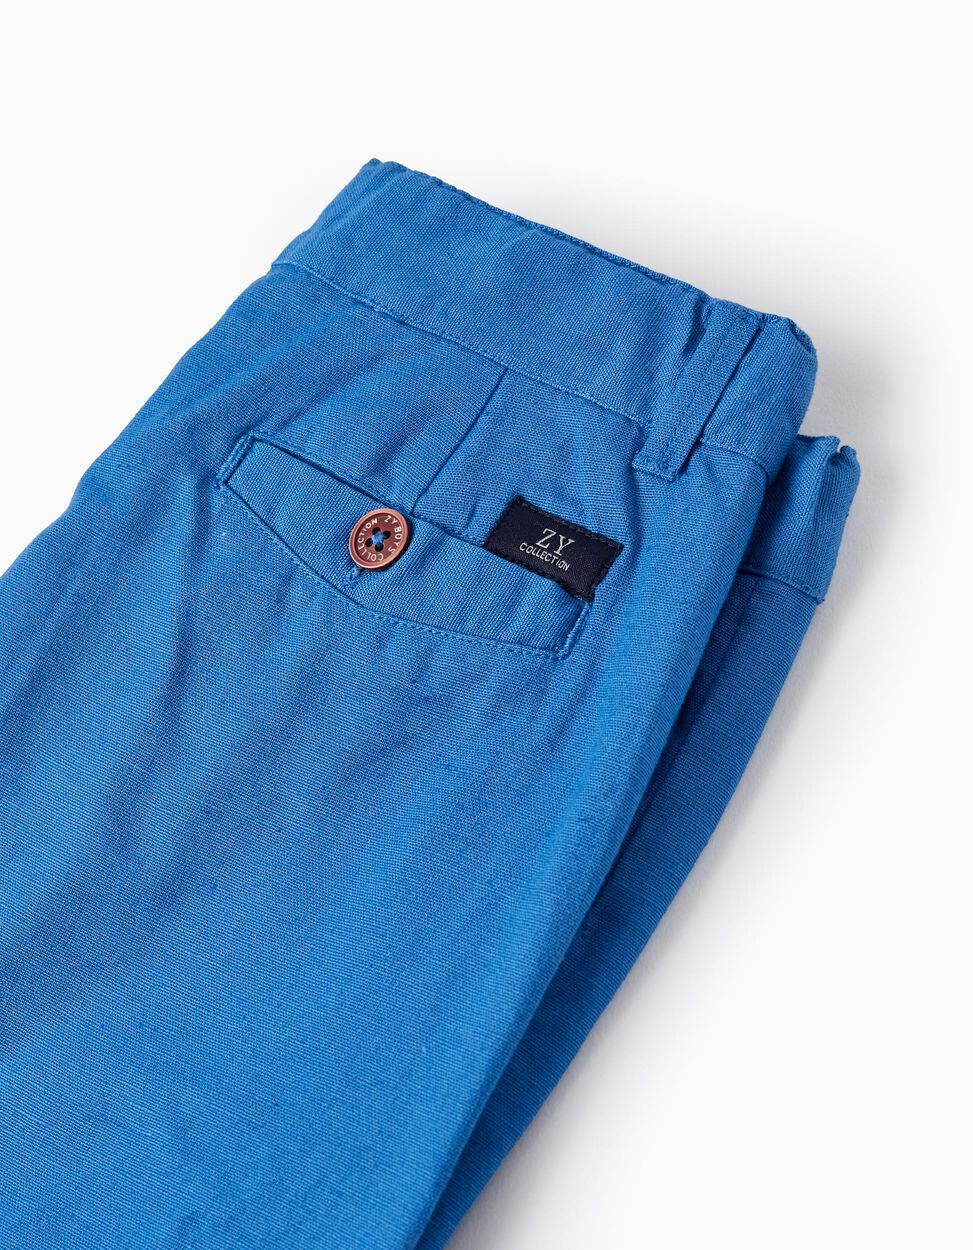 Buy Online Cotton and Linen Chino Shorts for Boys 'Long', Blue